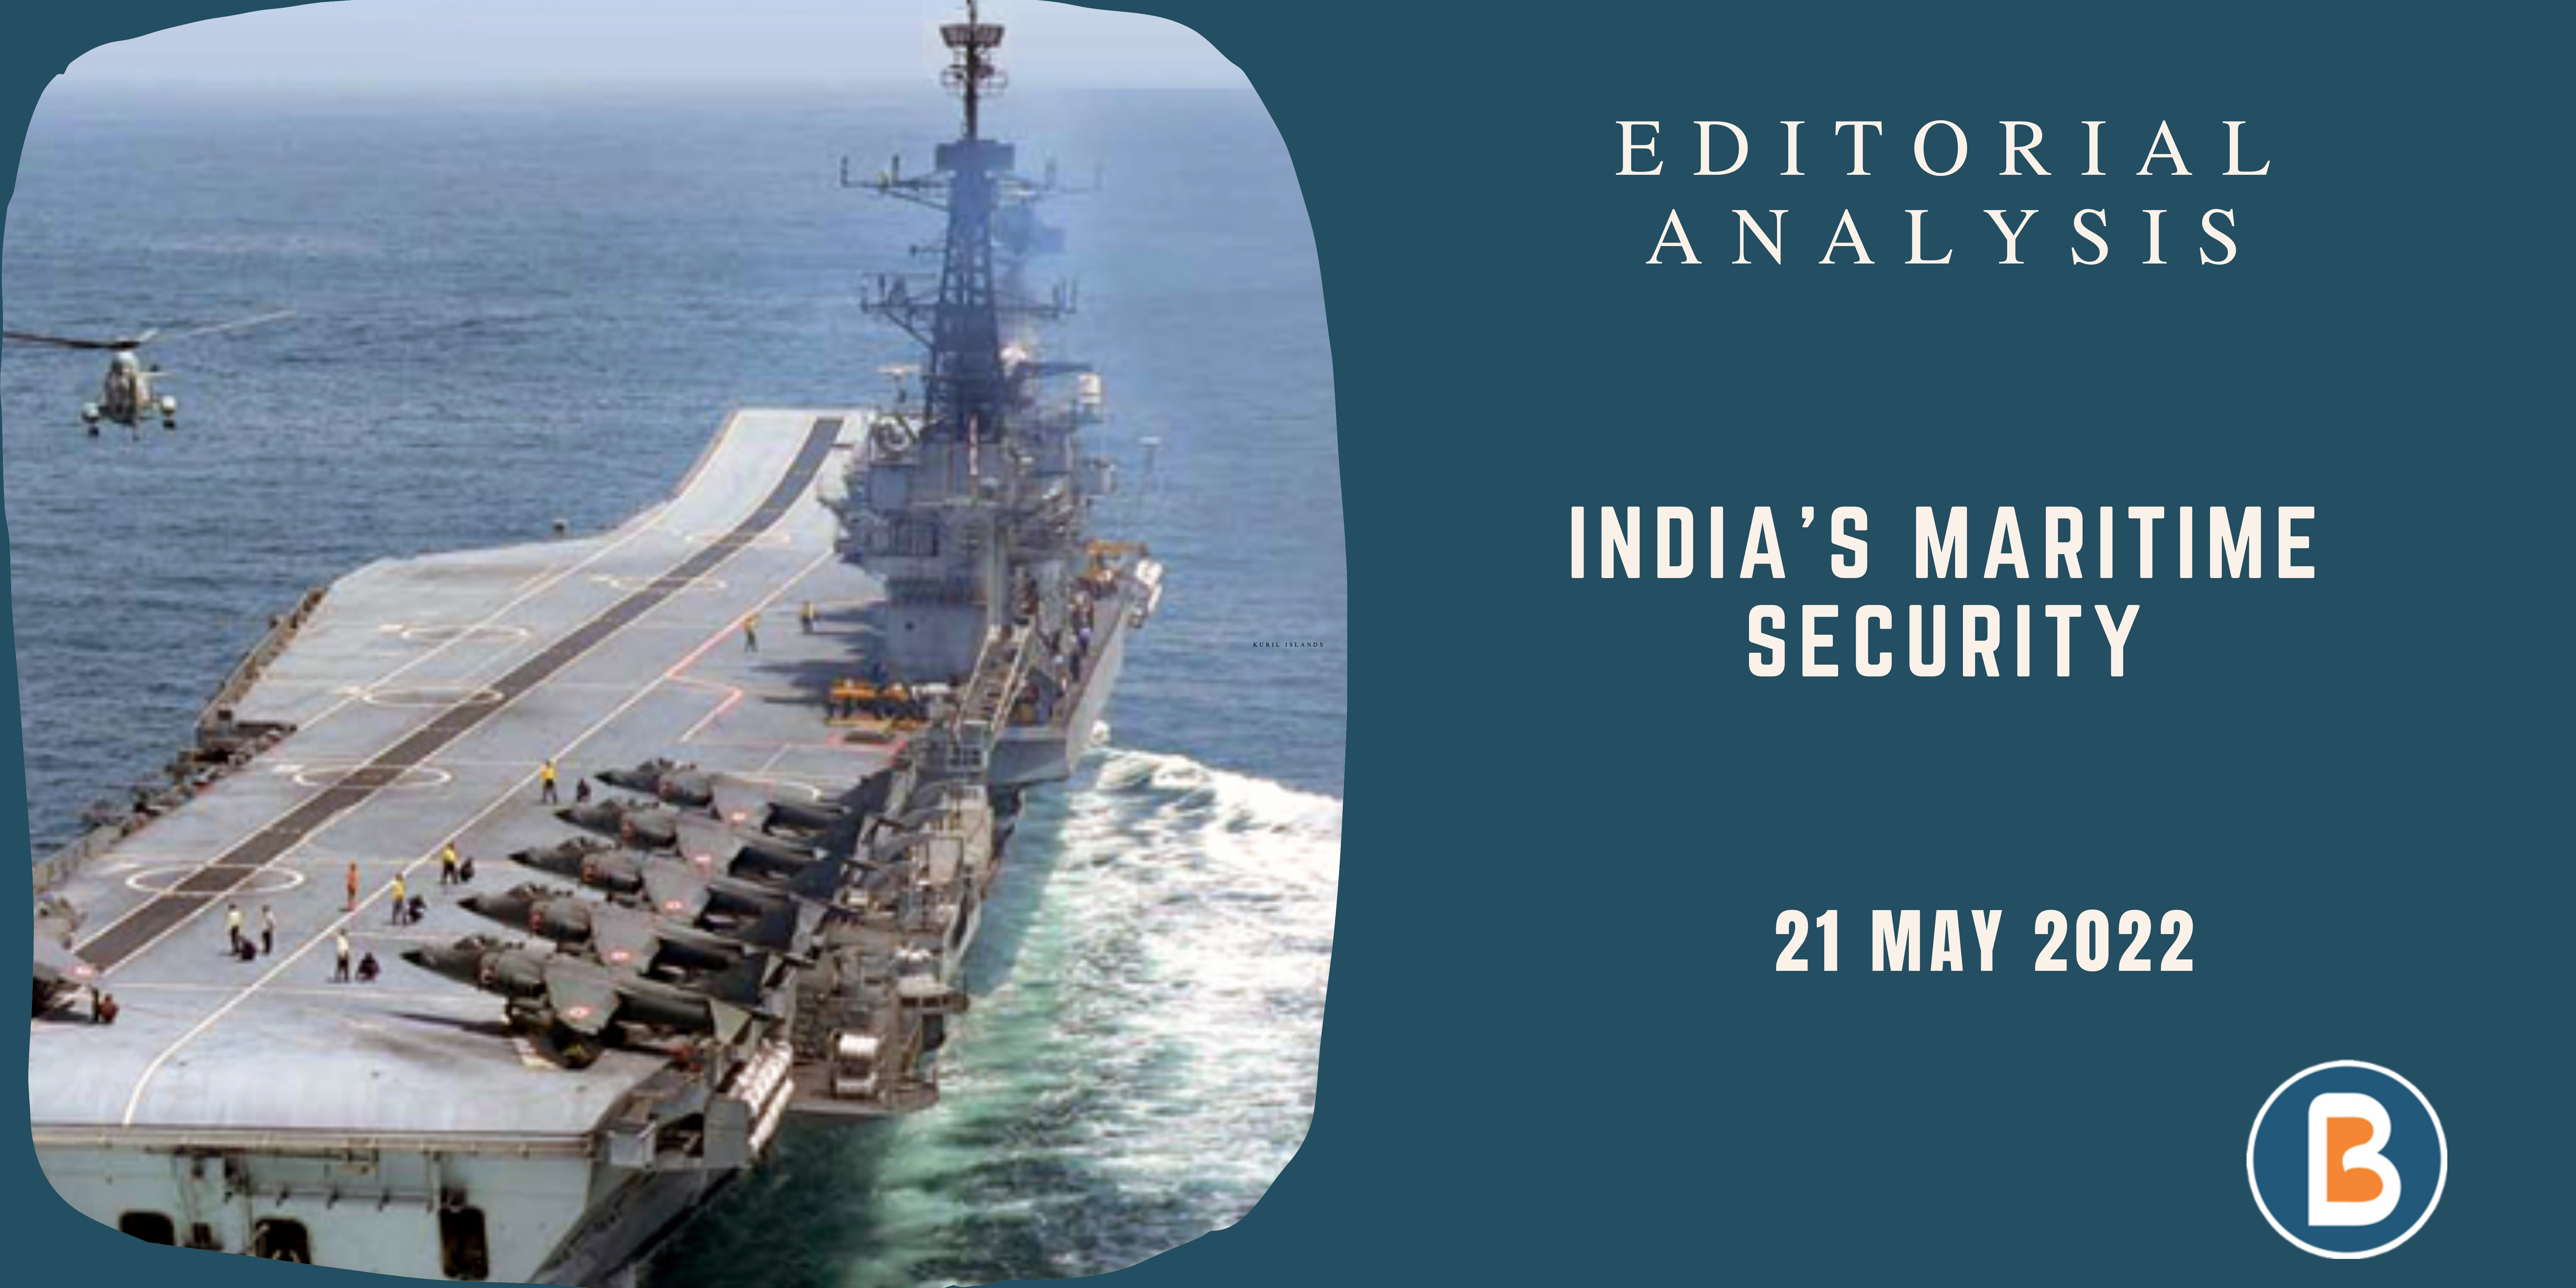 Editorial Analysis for Civil Services - India’s Maritime Security Concerns